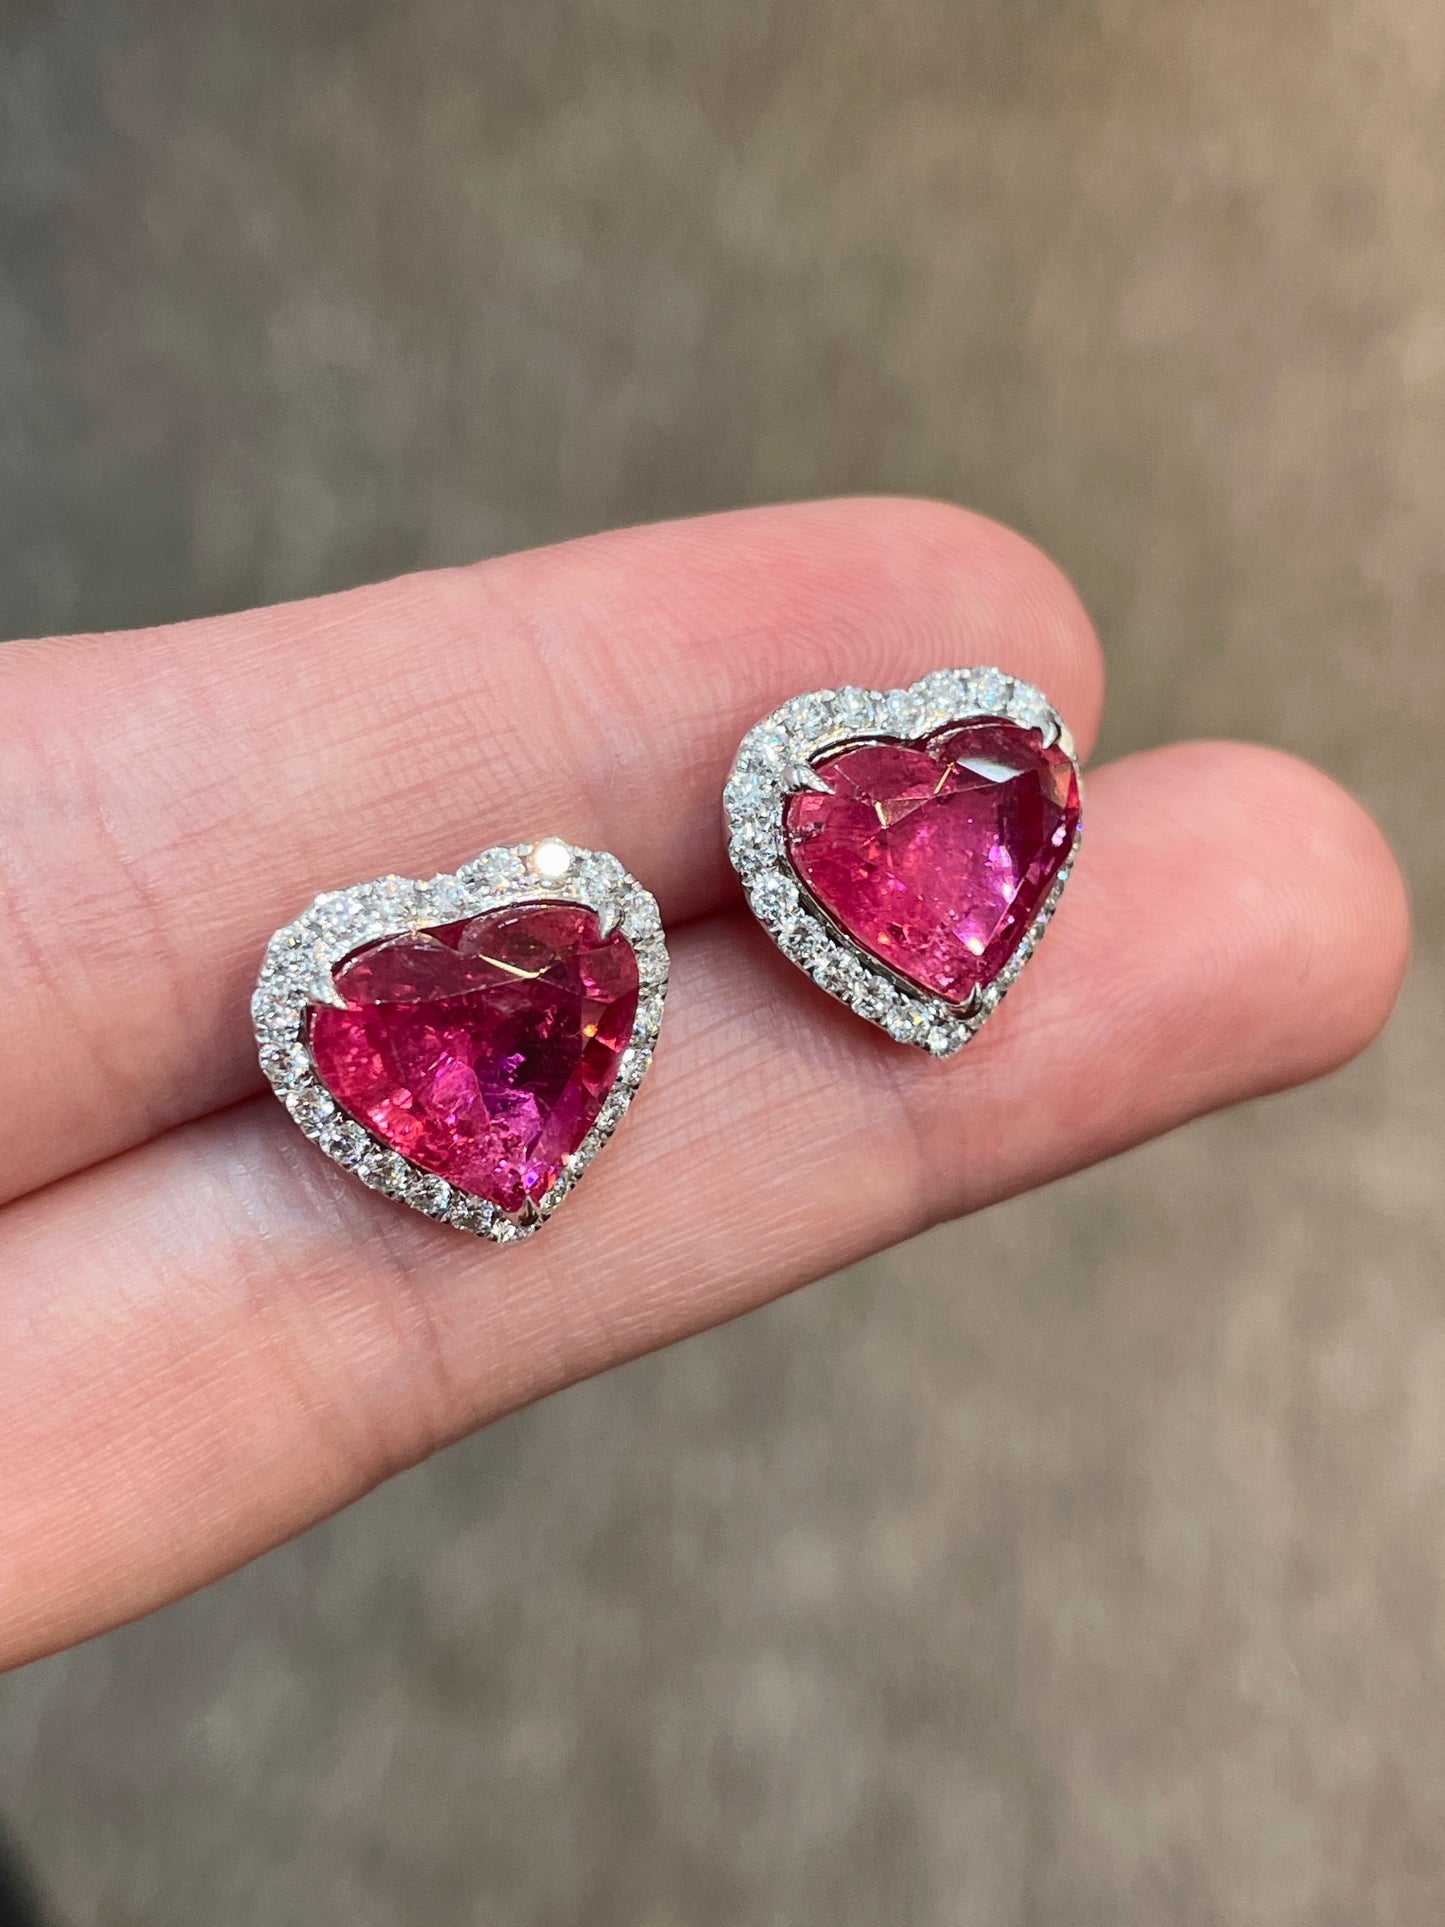 Natural Pink Tourmaline Earrings 6.98ct set with natural diamonds in 18k white gold